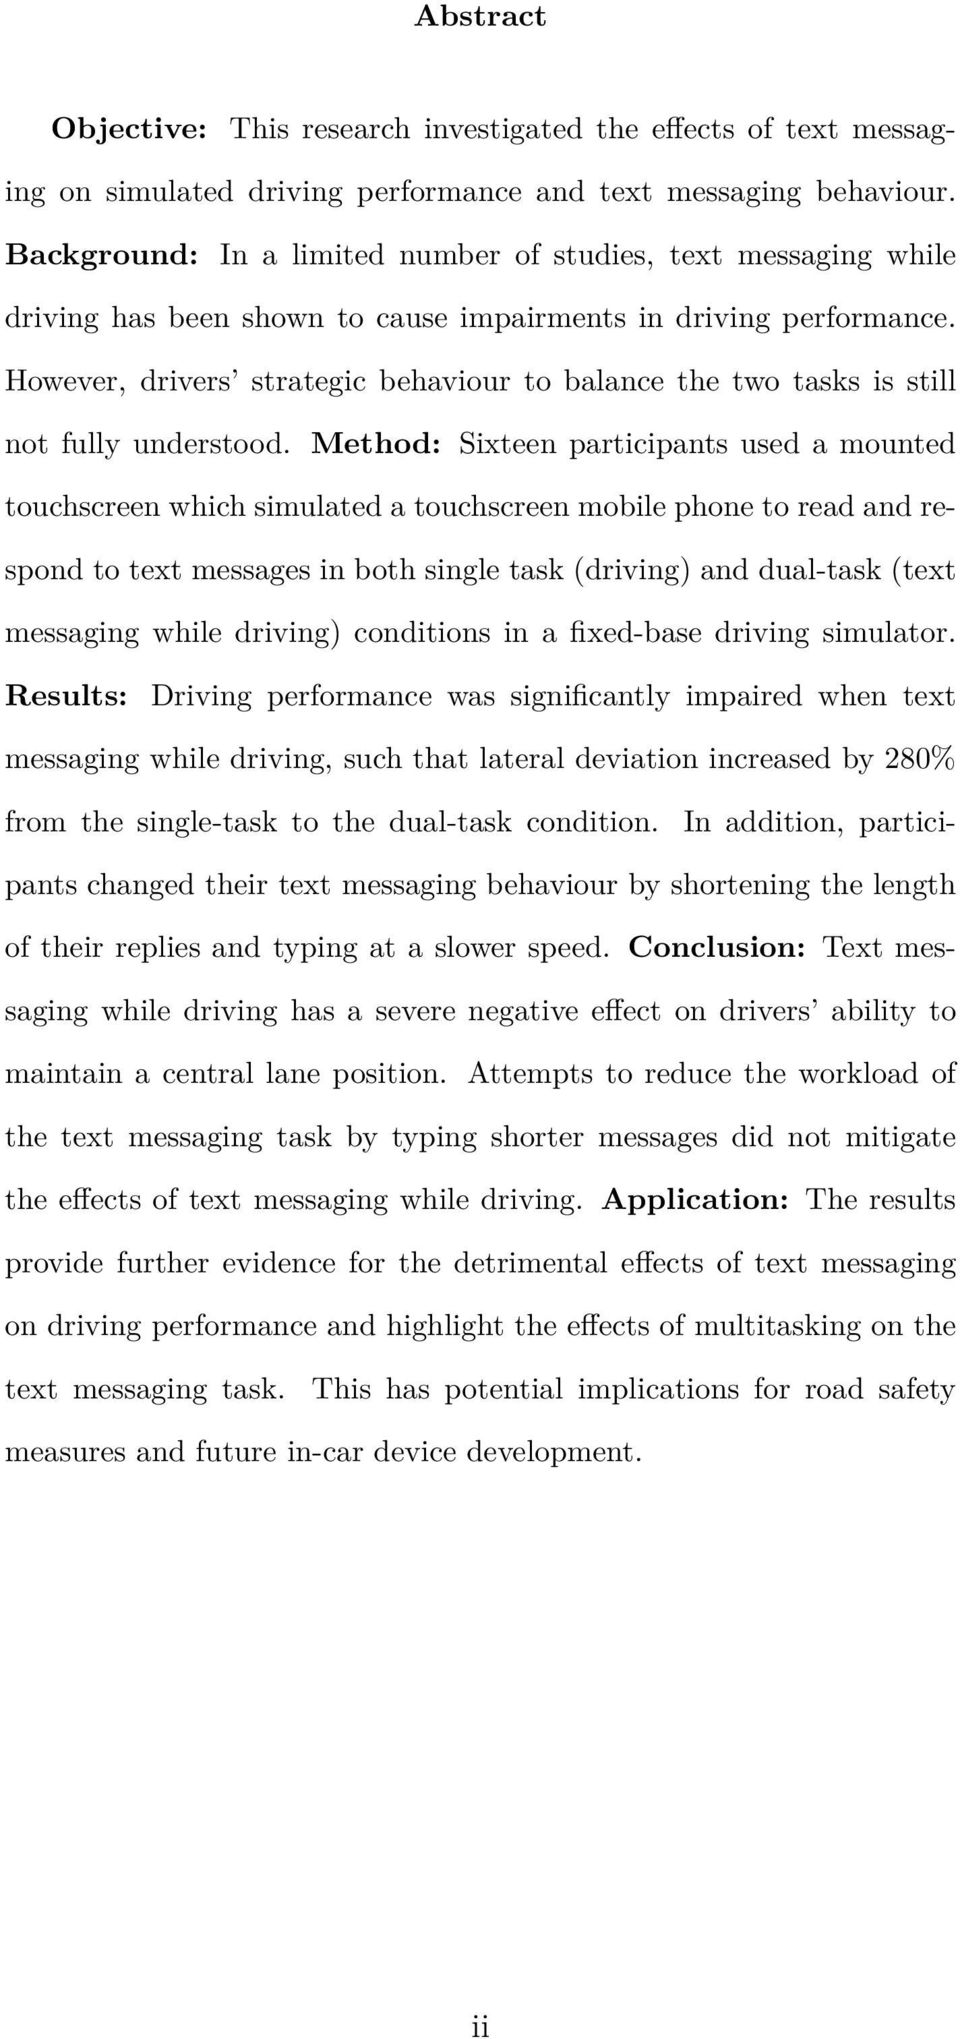 However, drivers strategic behaviour to balance the two tasks is still not fully understood.